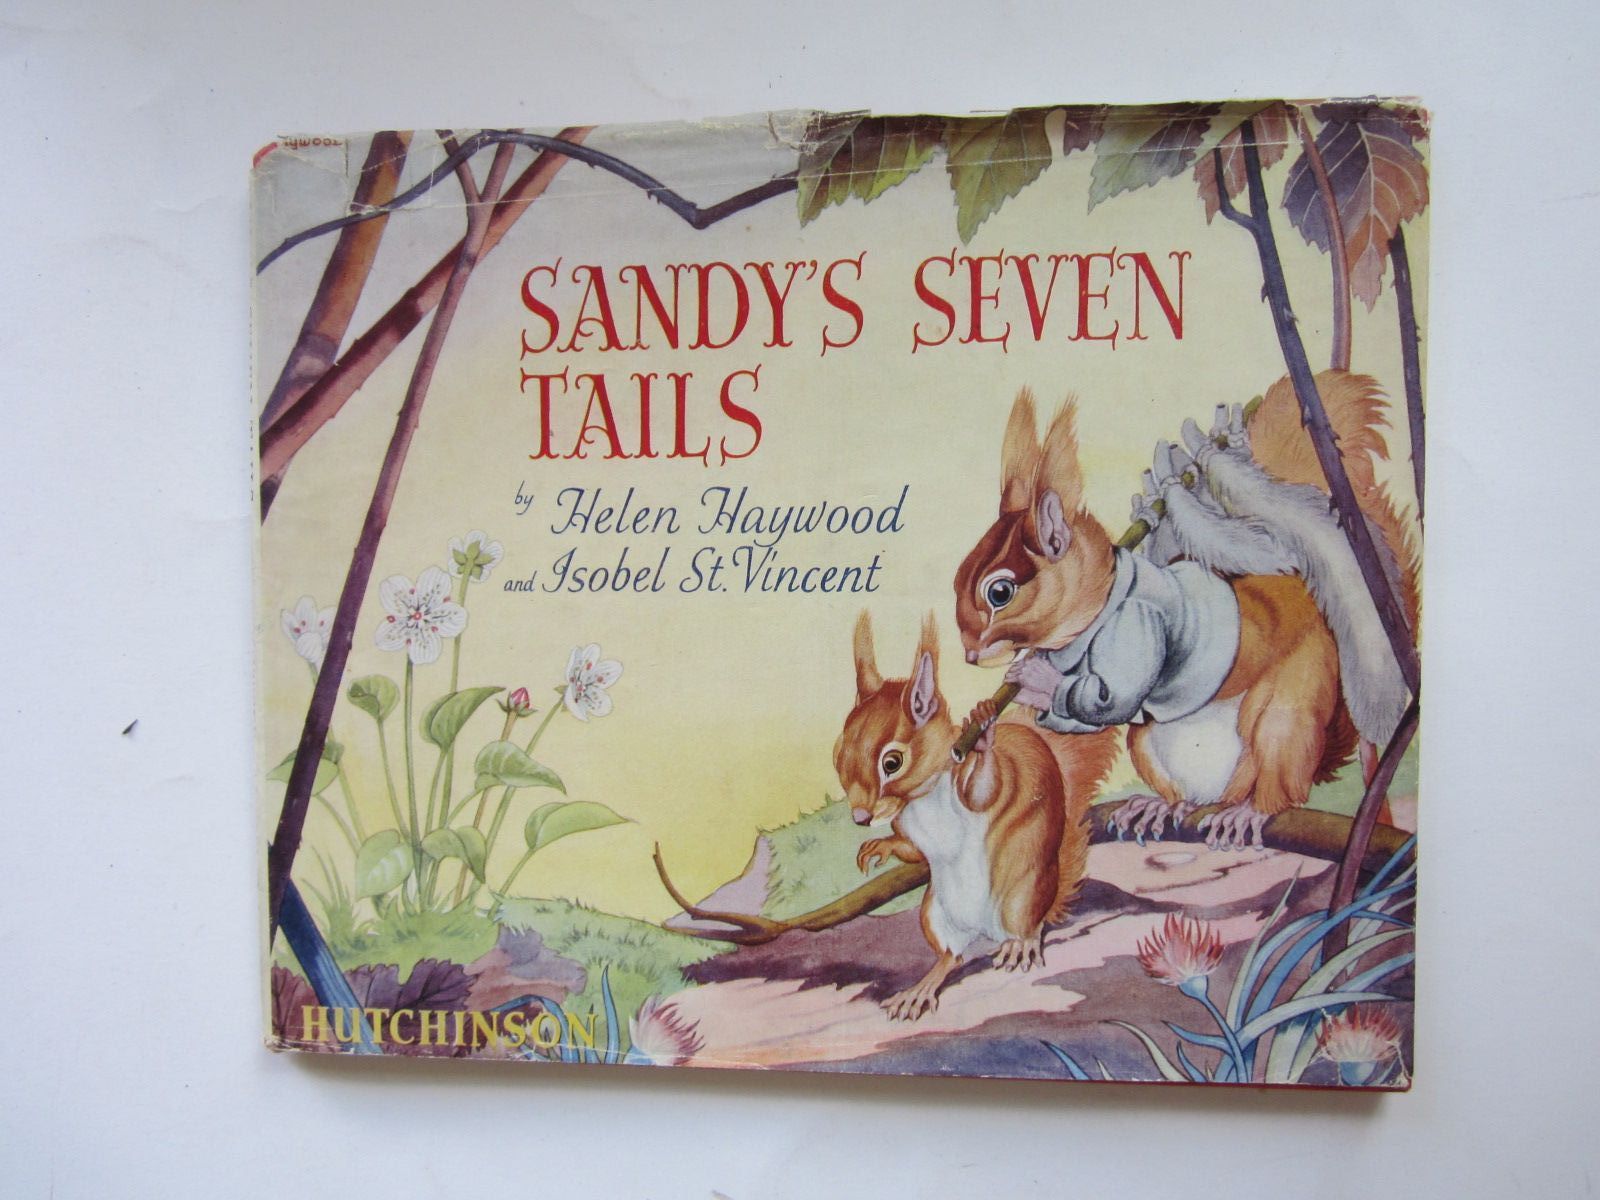 Photo of SANDY'S SEVEN TAILS written by Haywood, Helen
St. Vincent, Isobel illustrated by Haywood, Helen
St. Vincent, Isobel published by Hutchinson & Co. Ltd (STOCK CODE: 1207677)  for sale by Stella & Rose's Books